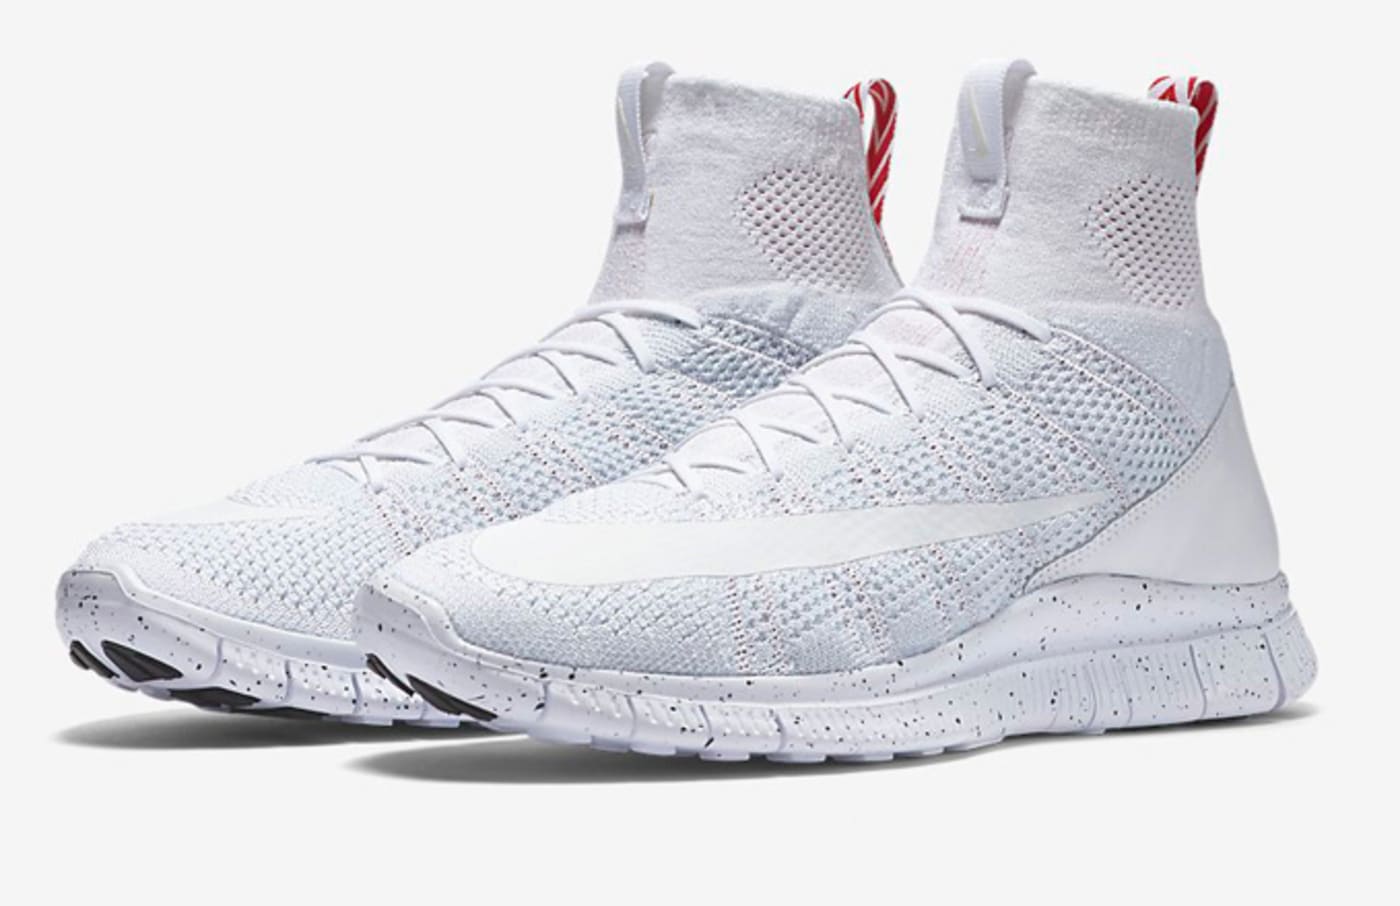 Nike Free Flyknit “All-White” Official Images | Complex